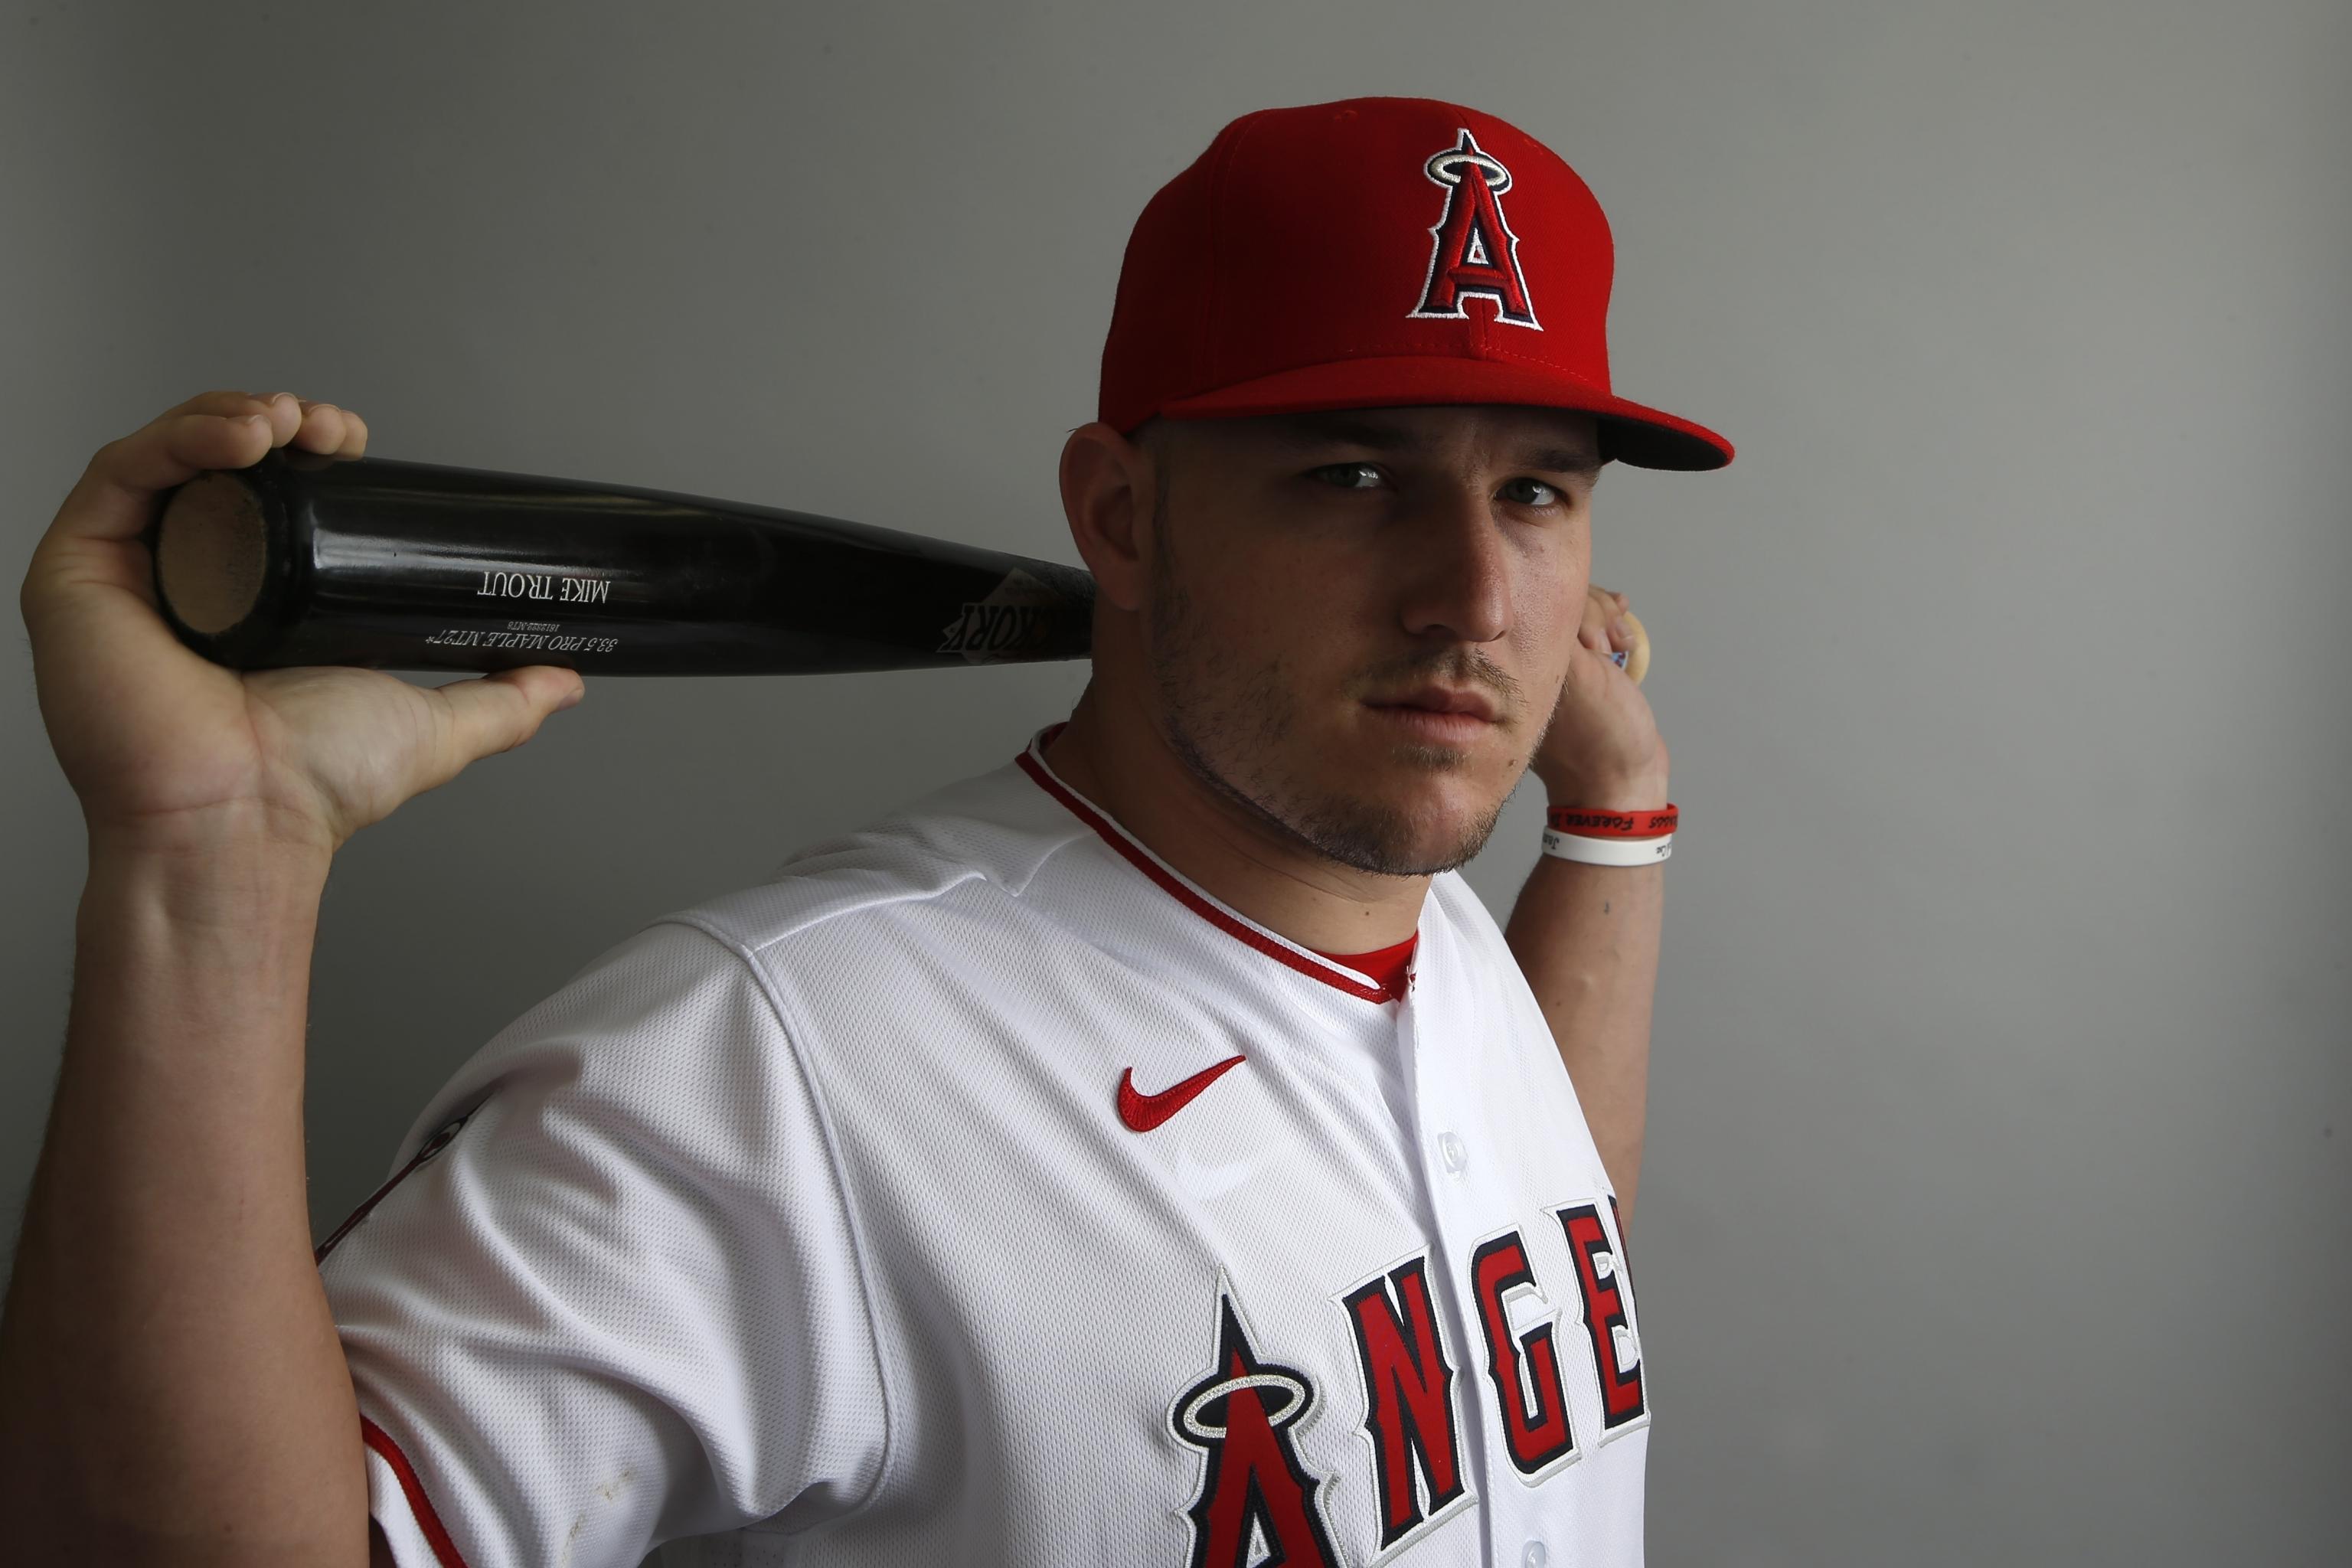 Mike Trout Signed Rookie Card Sells for $3.93M to Break All-Time Record, News, Scores, Highlights, Stats, and Rumors